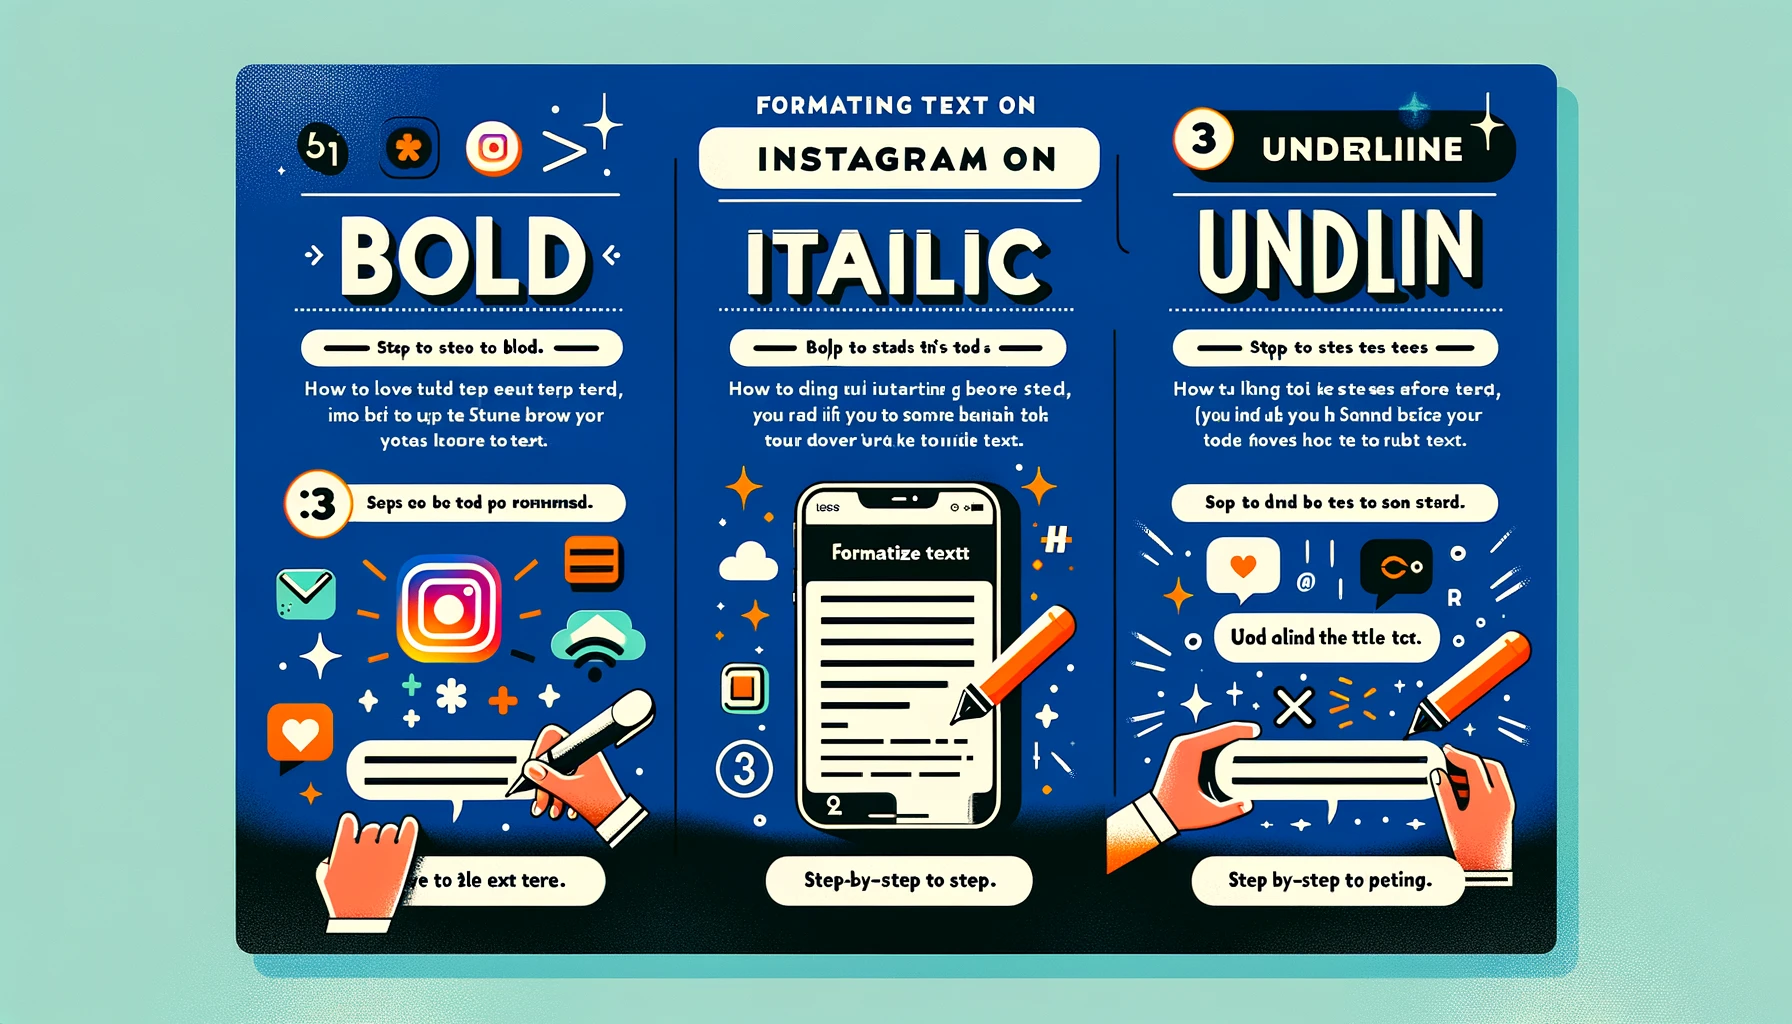 How to Bold, Italic and Underline on Instagram make images